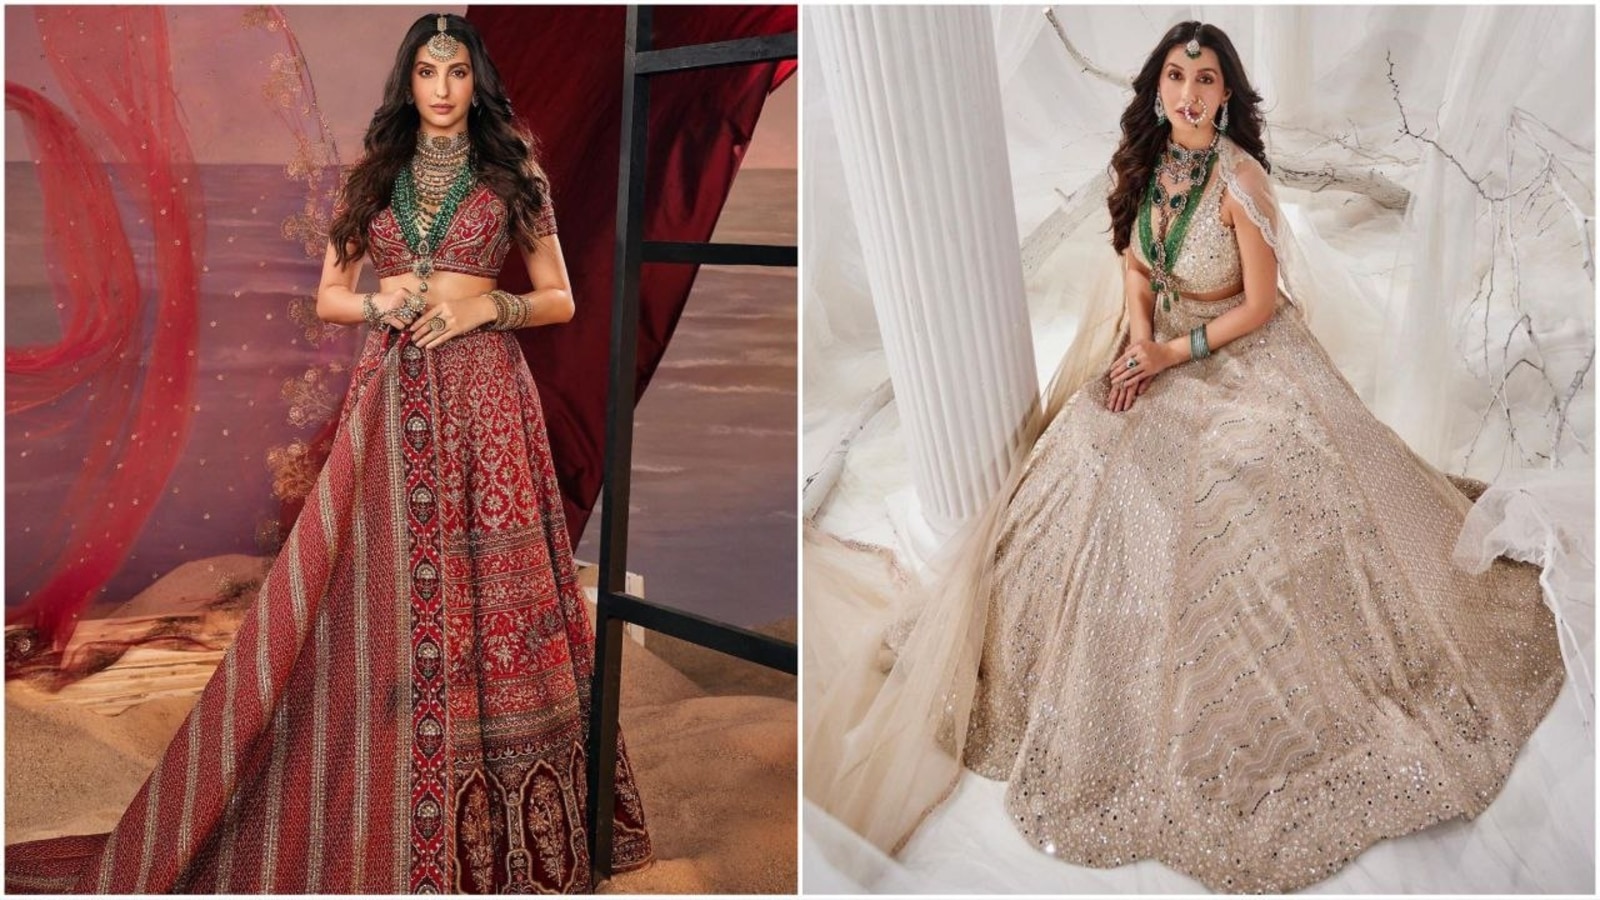 Nora Fatehi channels royal elegance in two dreamy lehenga ensembles; brides-to-be take notes. All glam pics inside